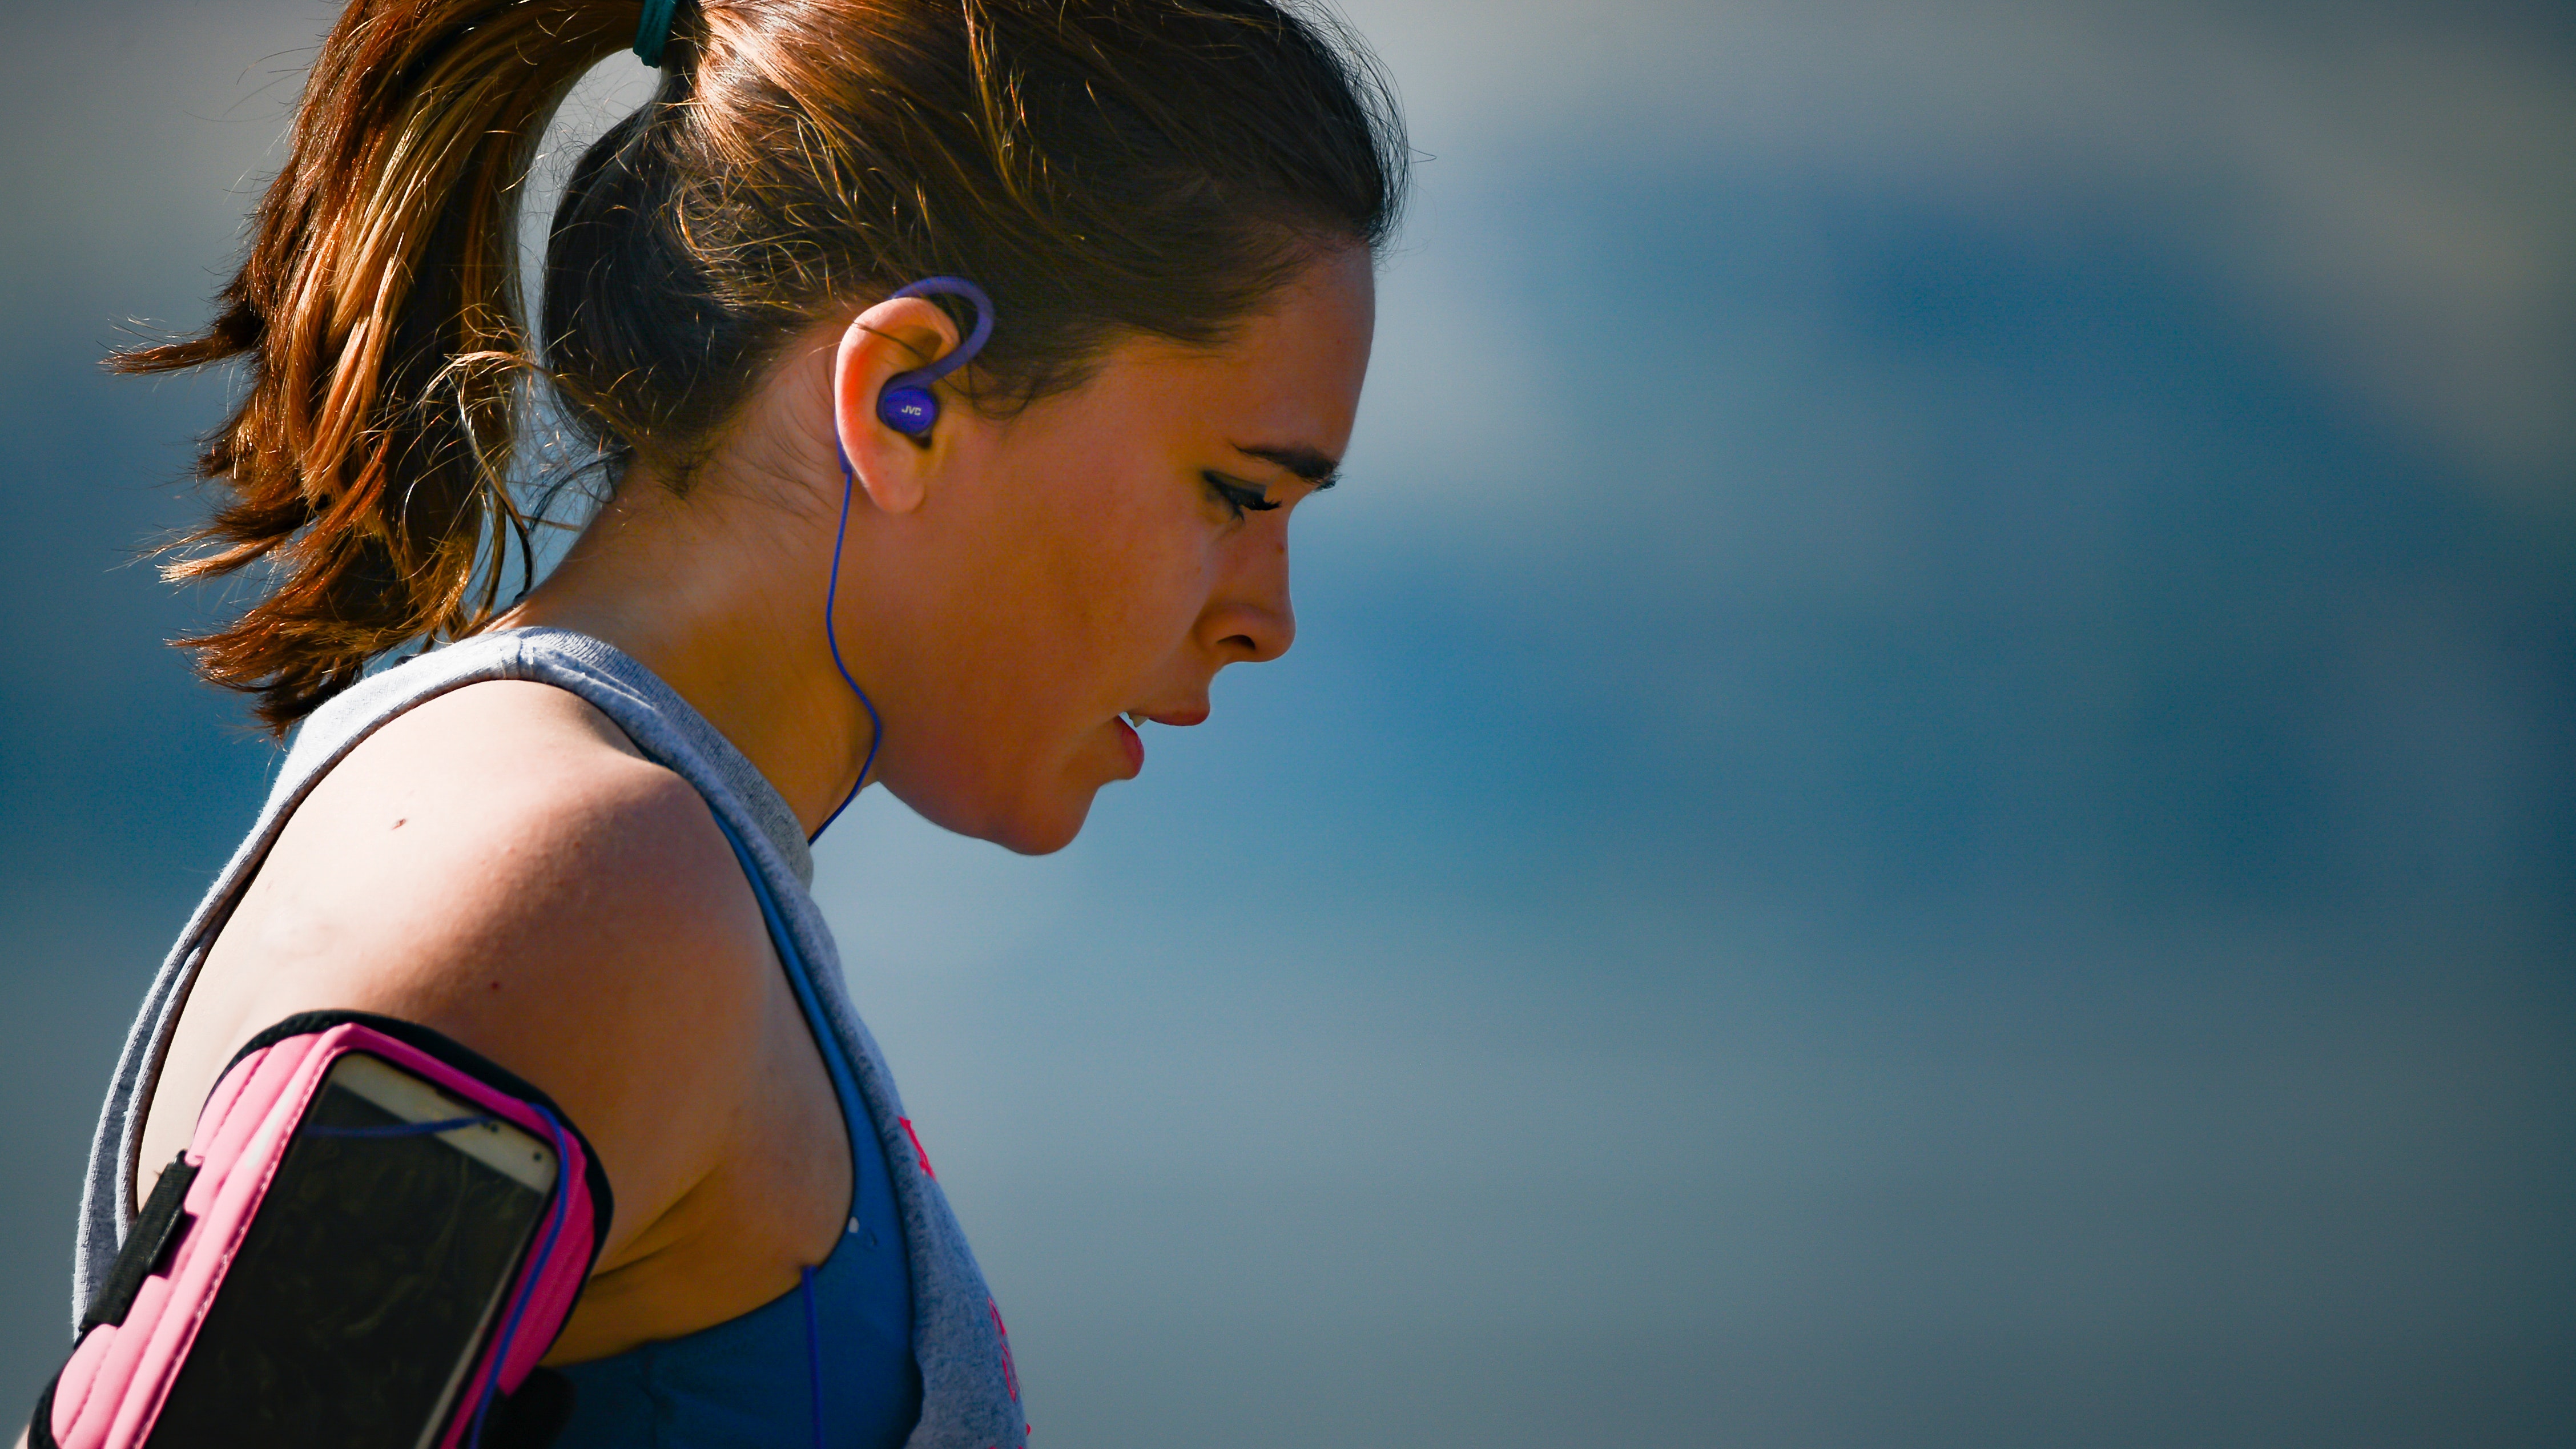 A side profile view of a woman's head. She is wearing headphones and activewear is about to commence exercise.